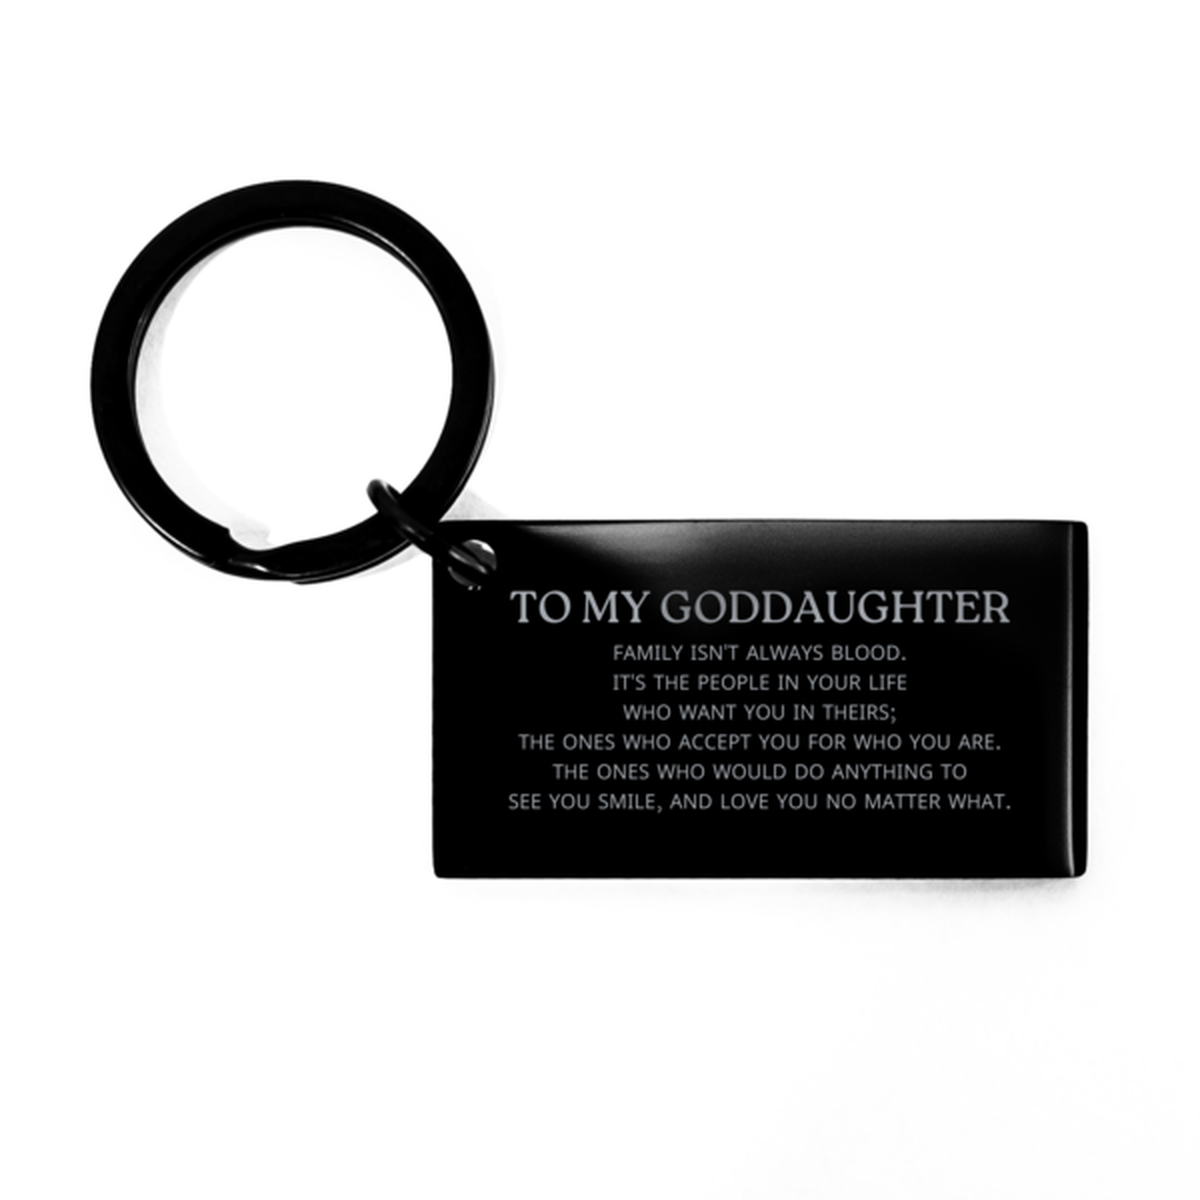 To My Goddaughter Gifts, Family isn't always blood, Goddaughter Keychain, Birthday Christmas Unique Present For Goddaughter